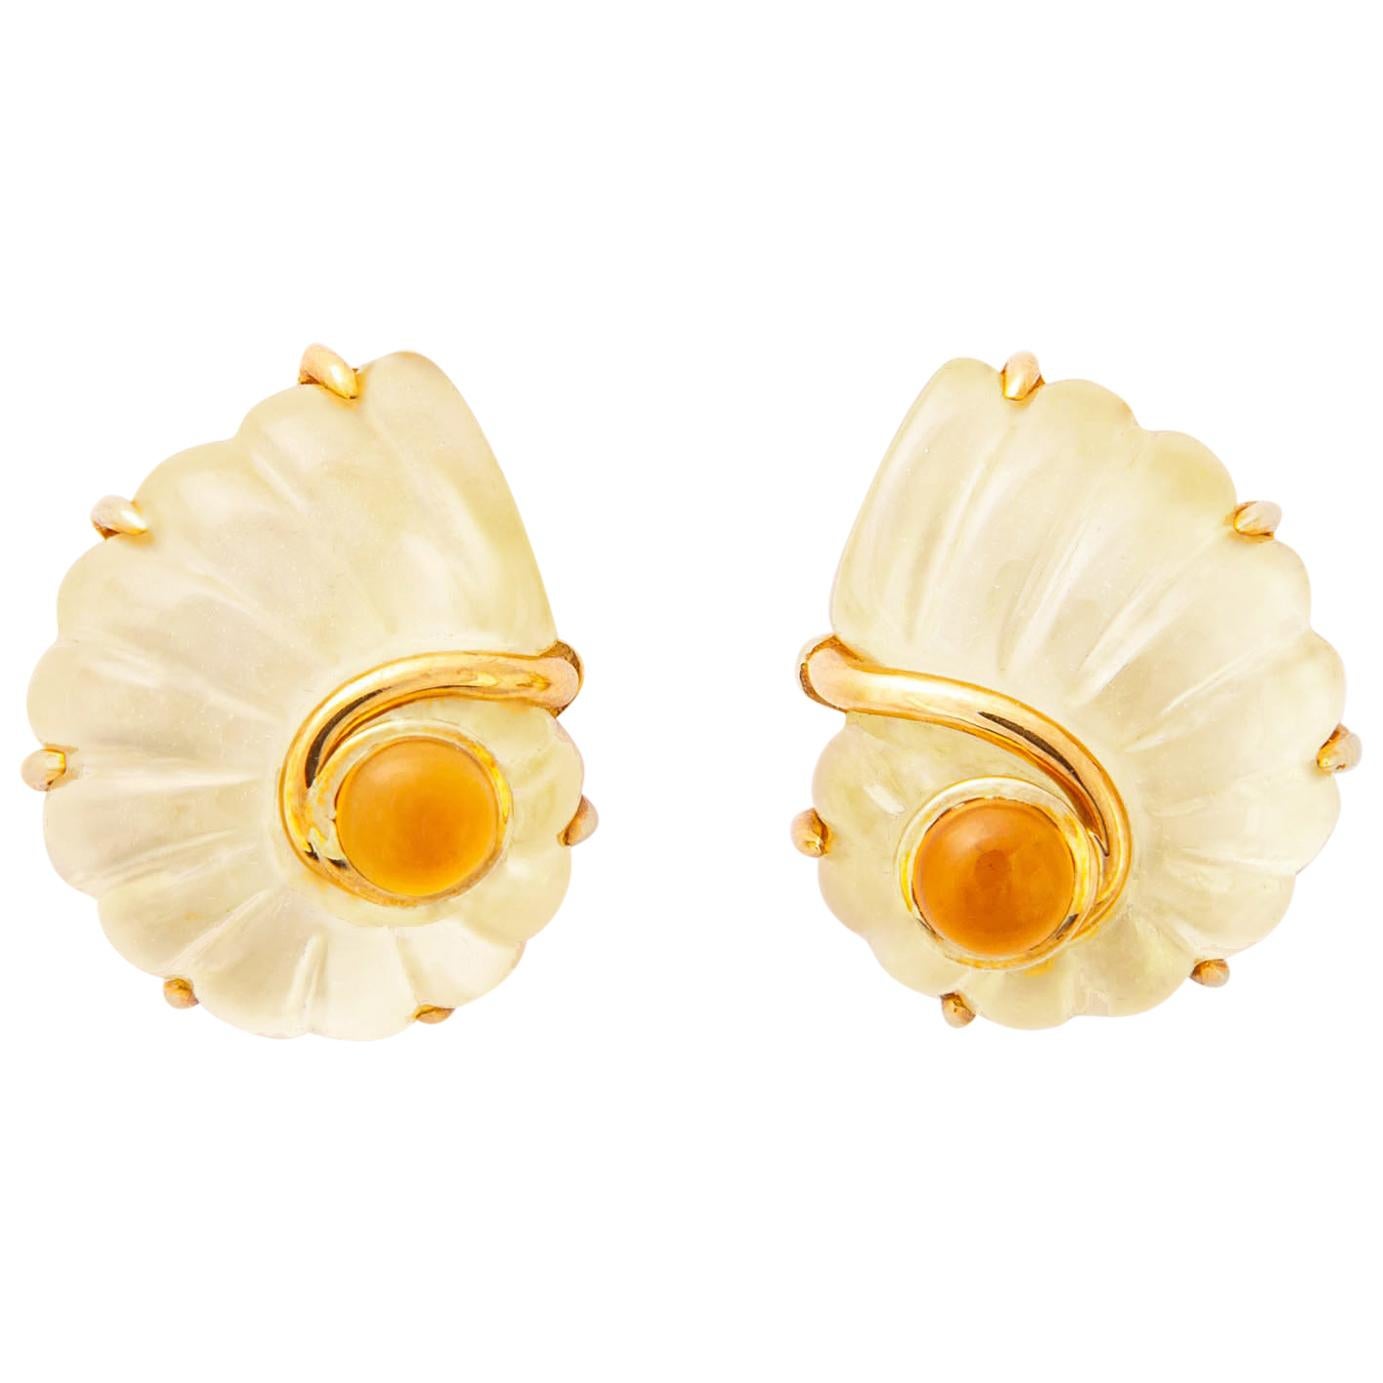 Trianon Rock Crystal, Citrine and Mother of Pearl Earrings